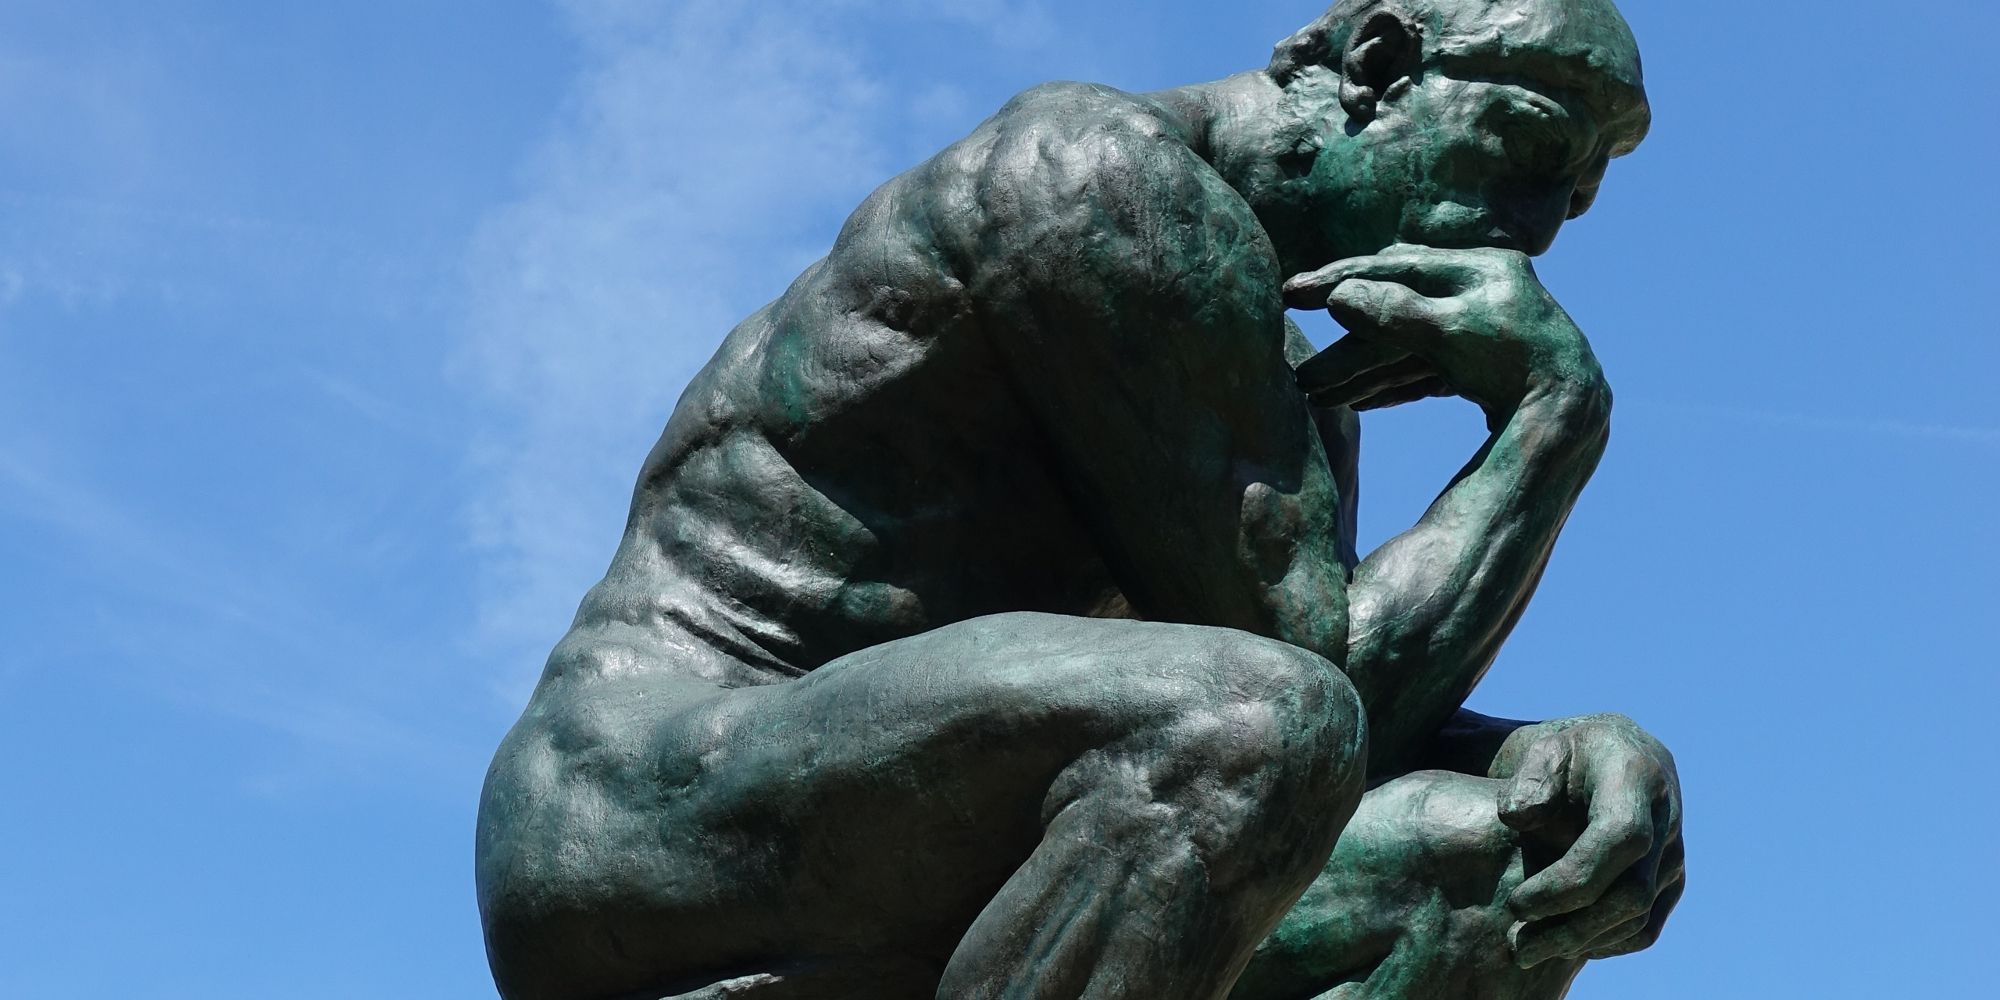 Auguste Rodin's The Thinker